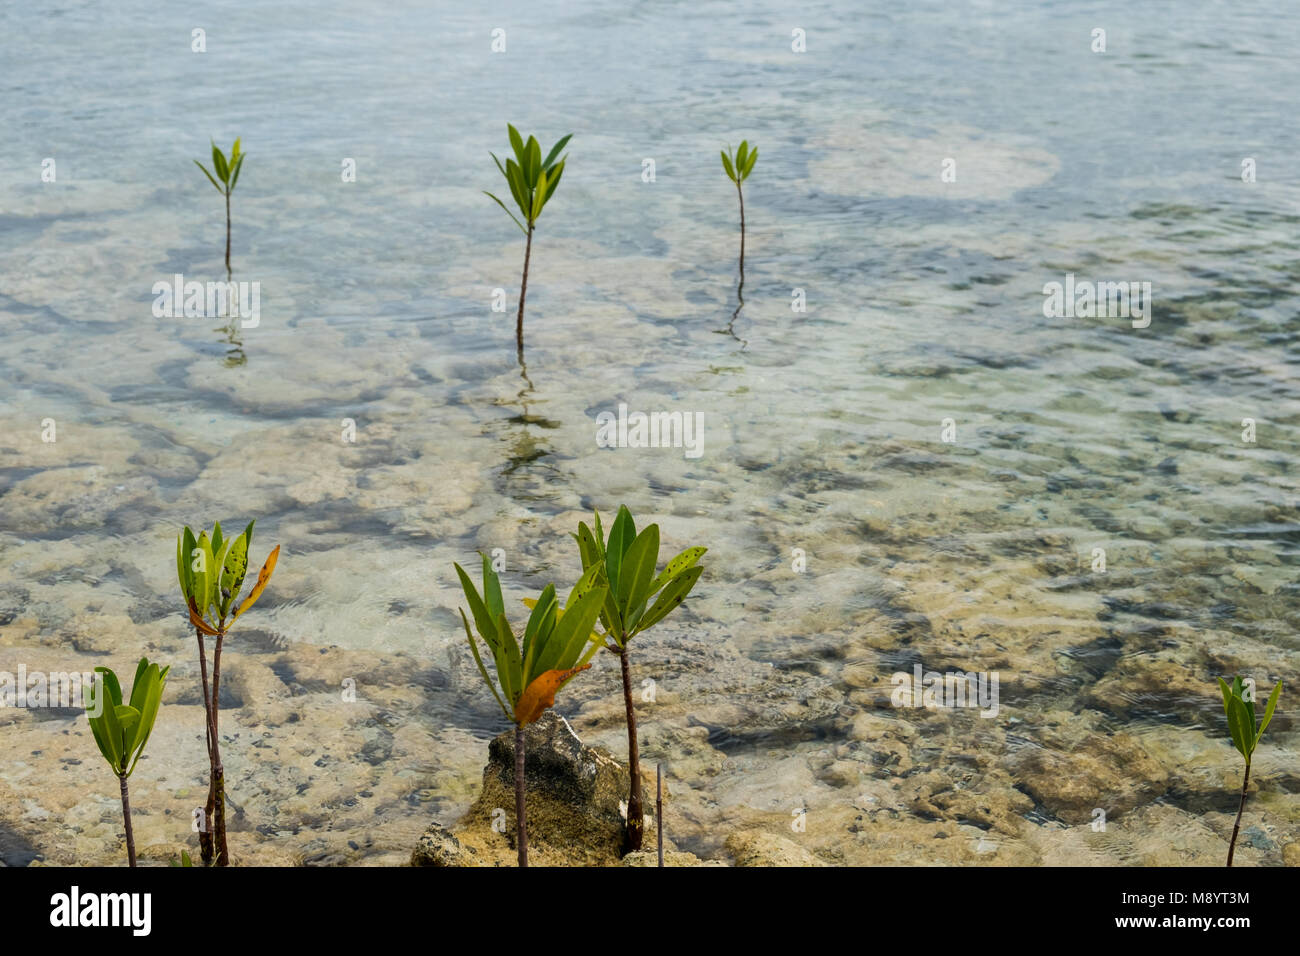 young mangrove trees growing in shallow water - Stock Photo